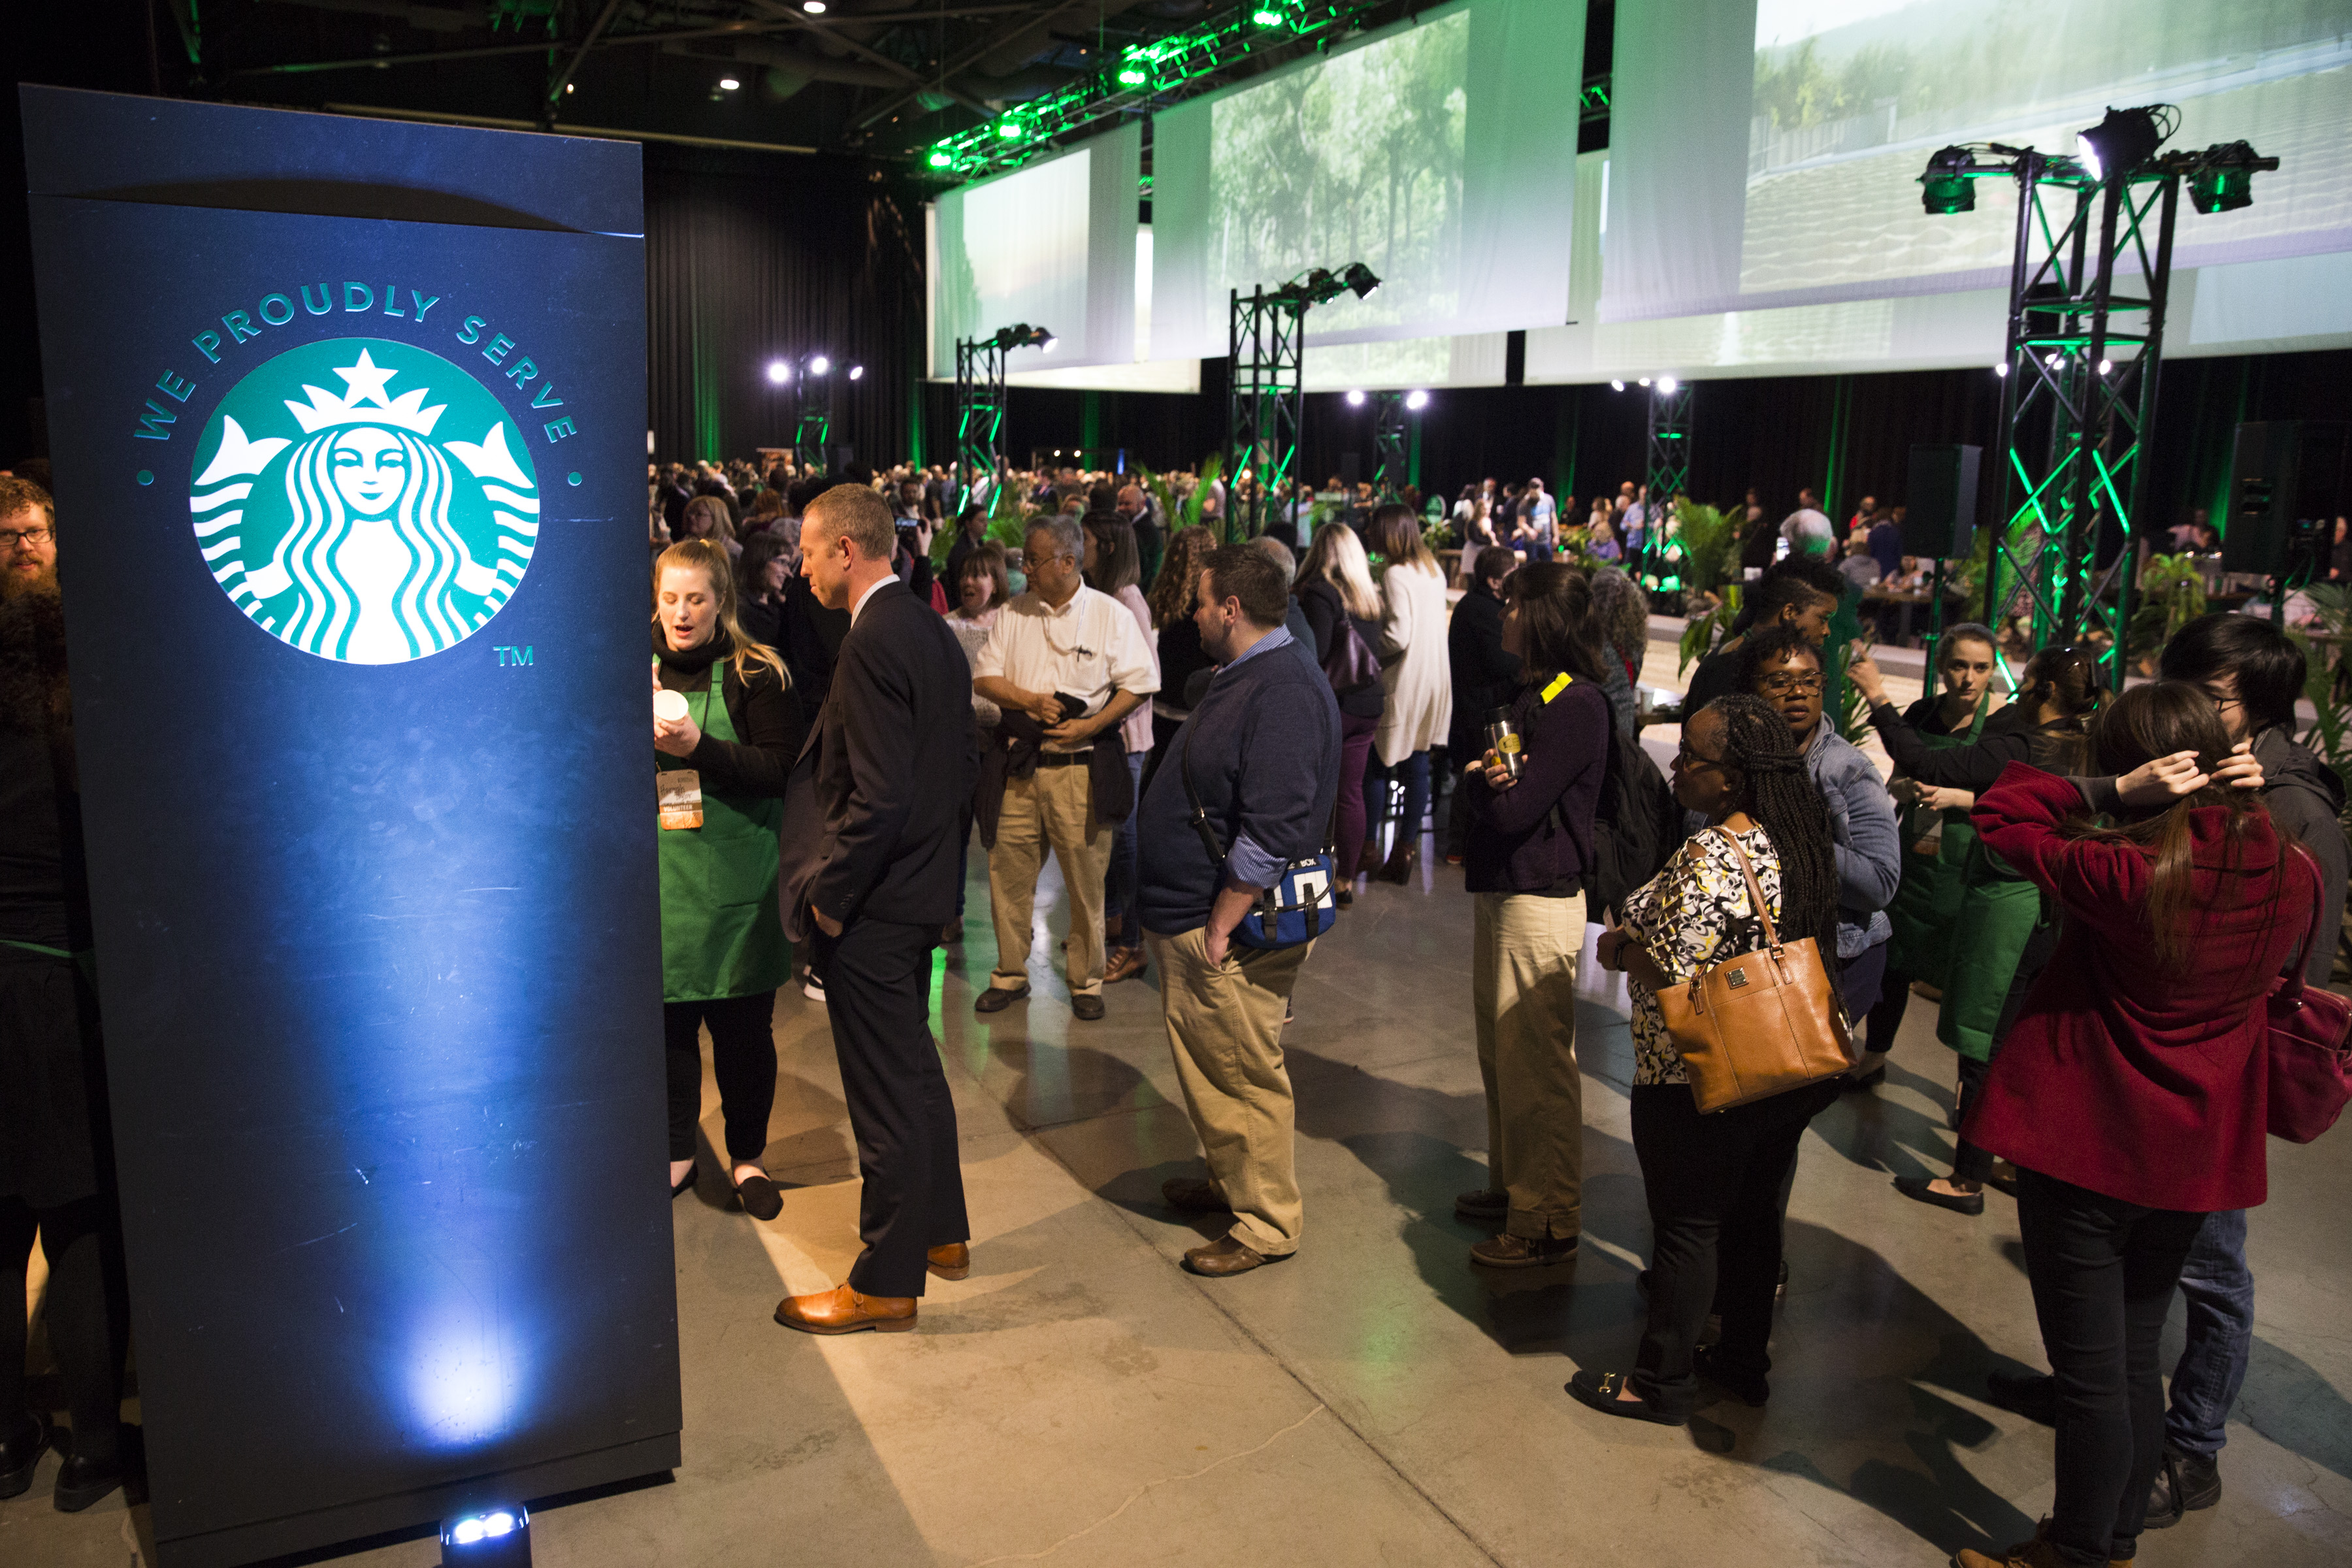 Shareholders line up for coffee at the Annual Meeting of Shareholders in Seattle, Washington on March 20, 2019.